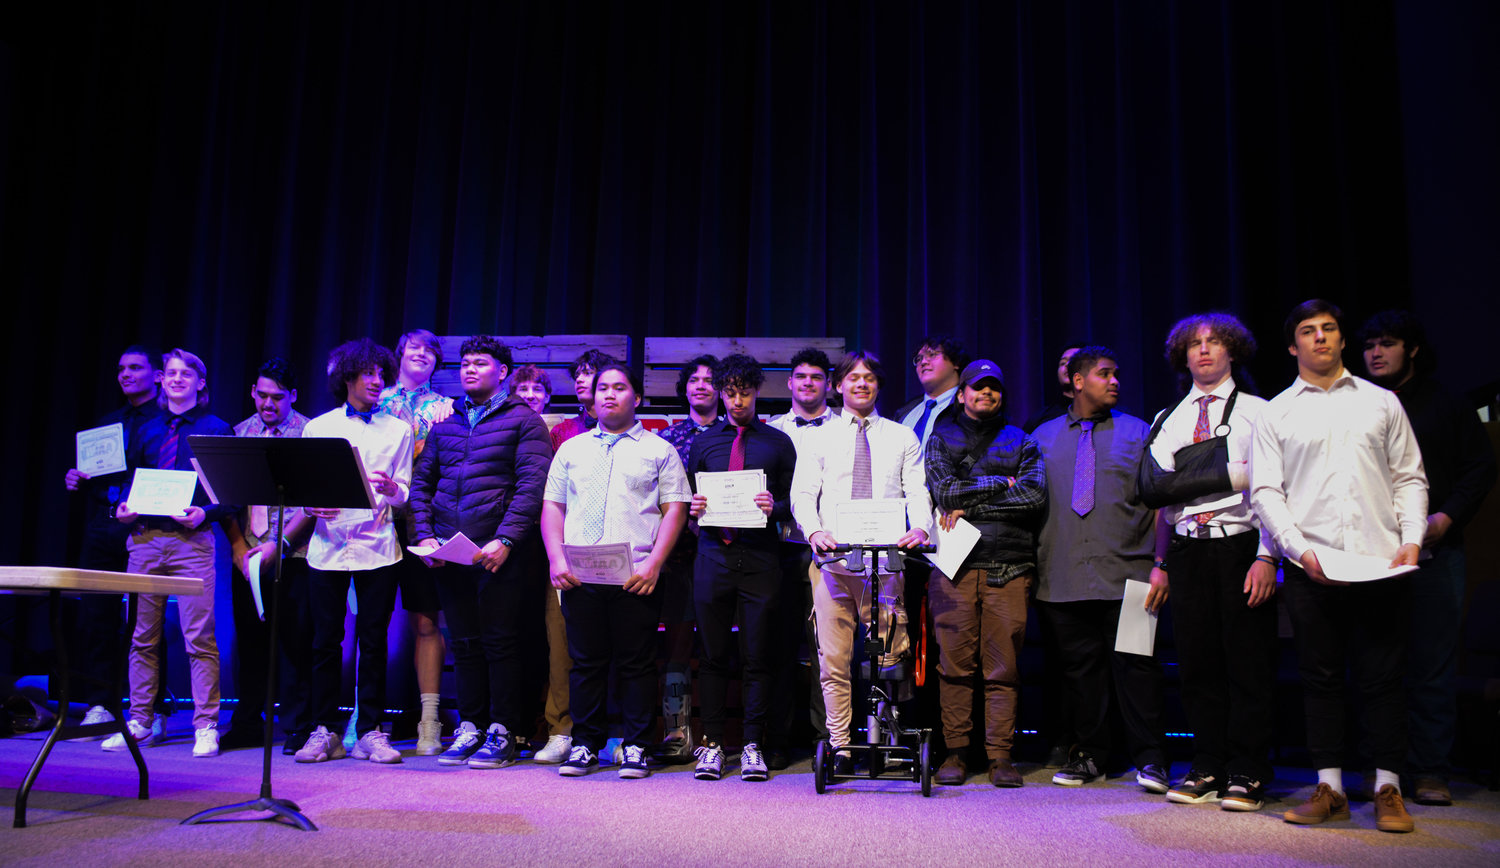 The Tornados varsity football team stands on the stage after they received their varsity letters on Tuesday, Jan. 10.